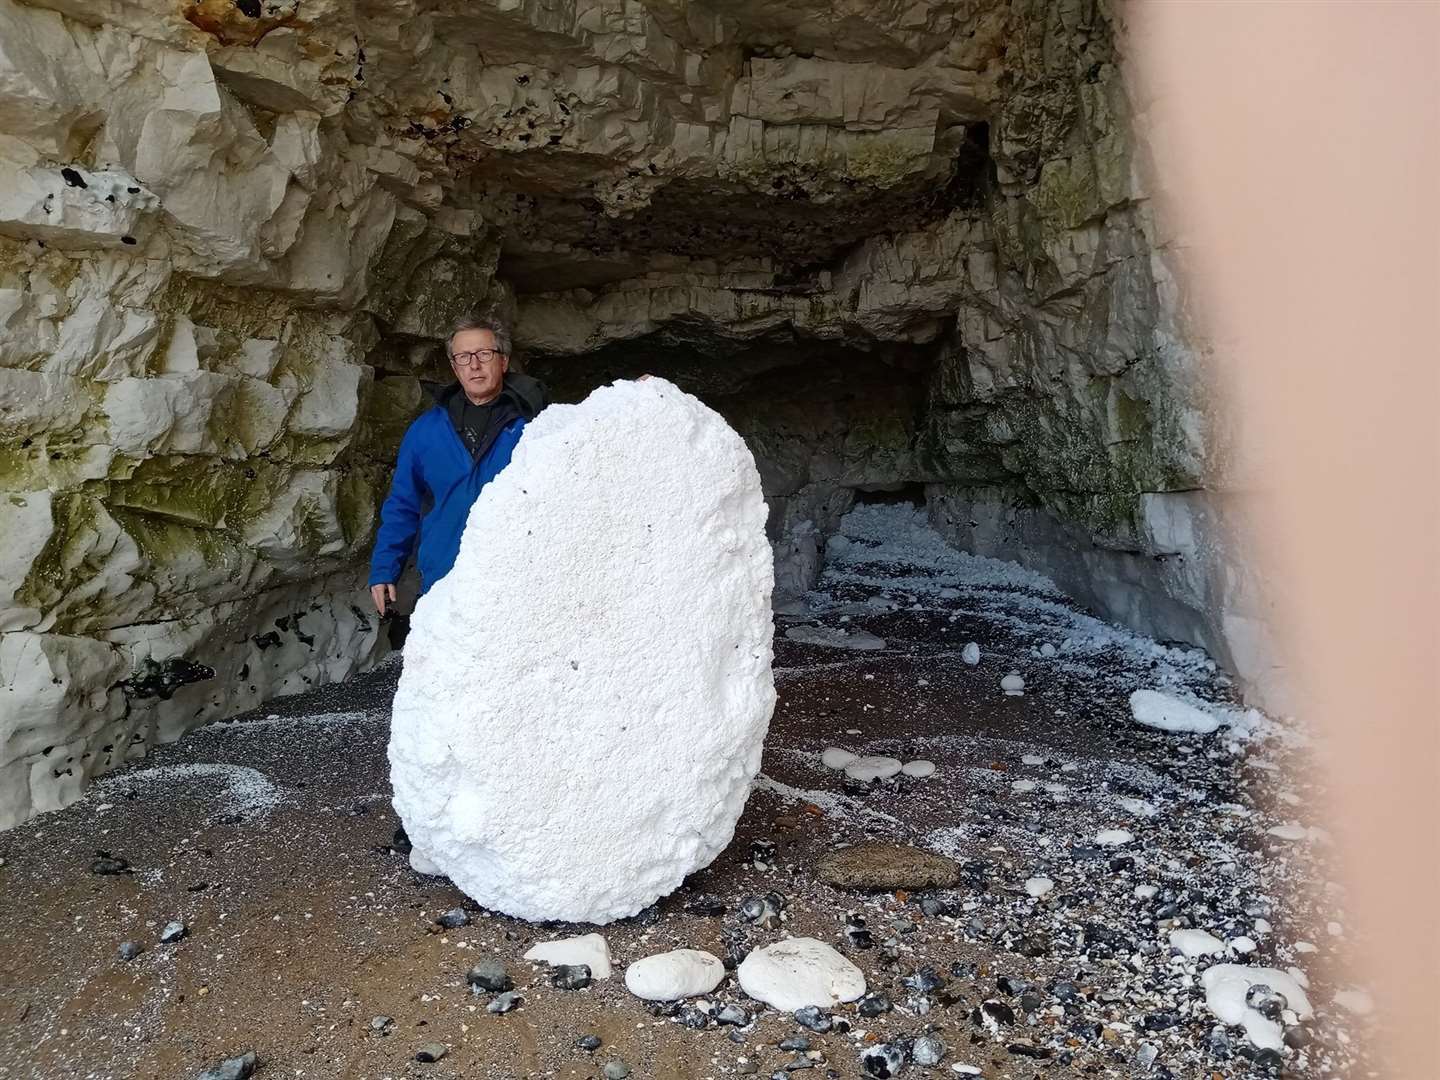 Huge chunks of Polystyrene washed up on a Ramsgate beach yesterday. All pictures: Trevor Cooper